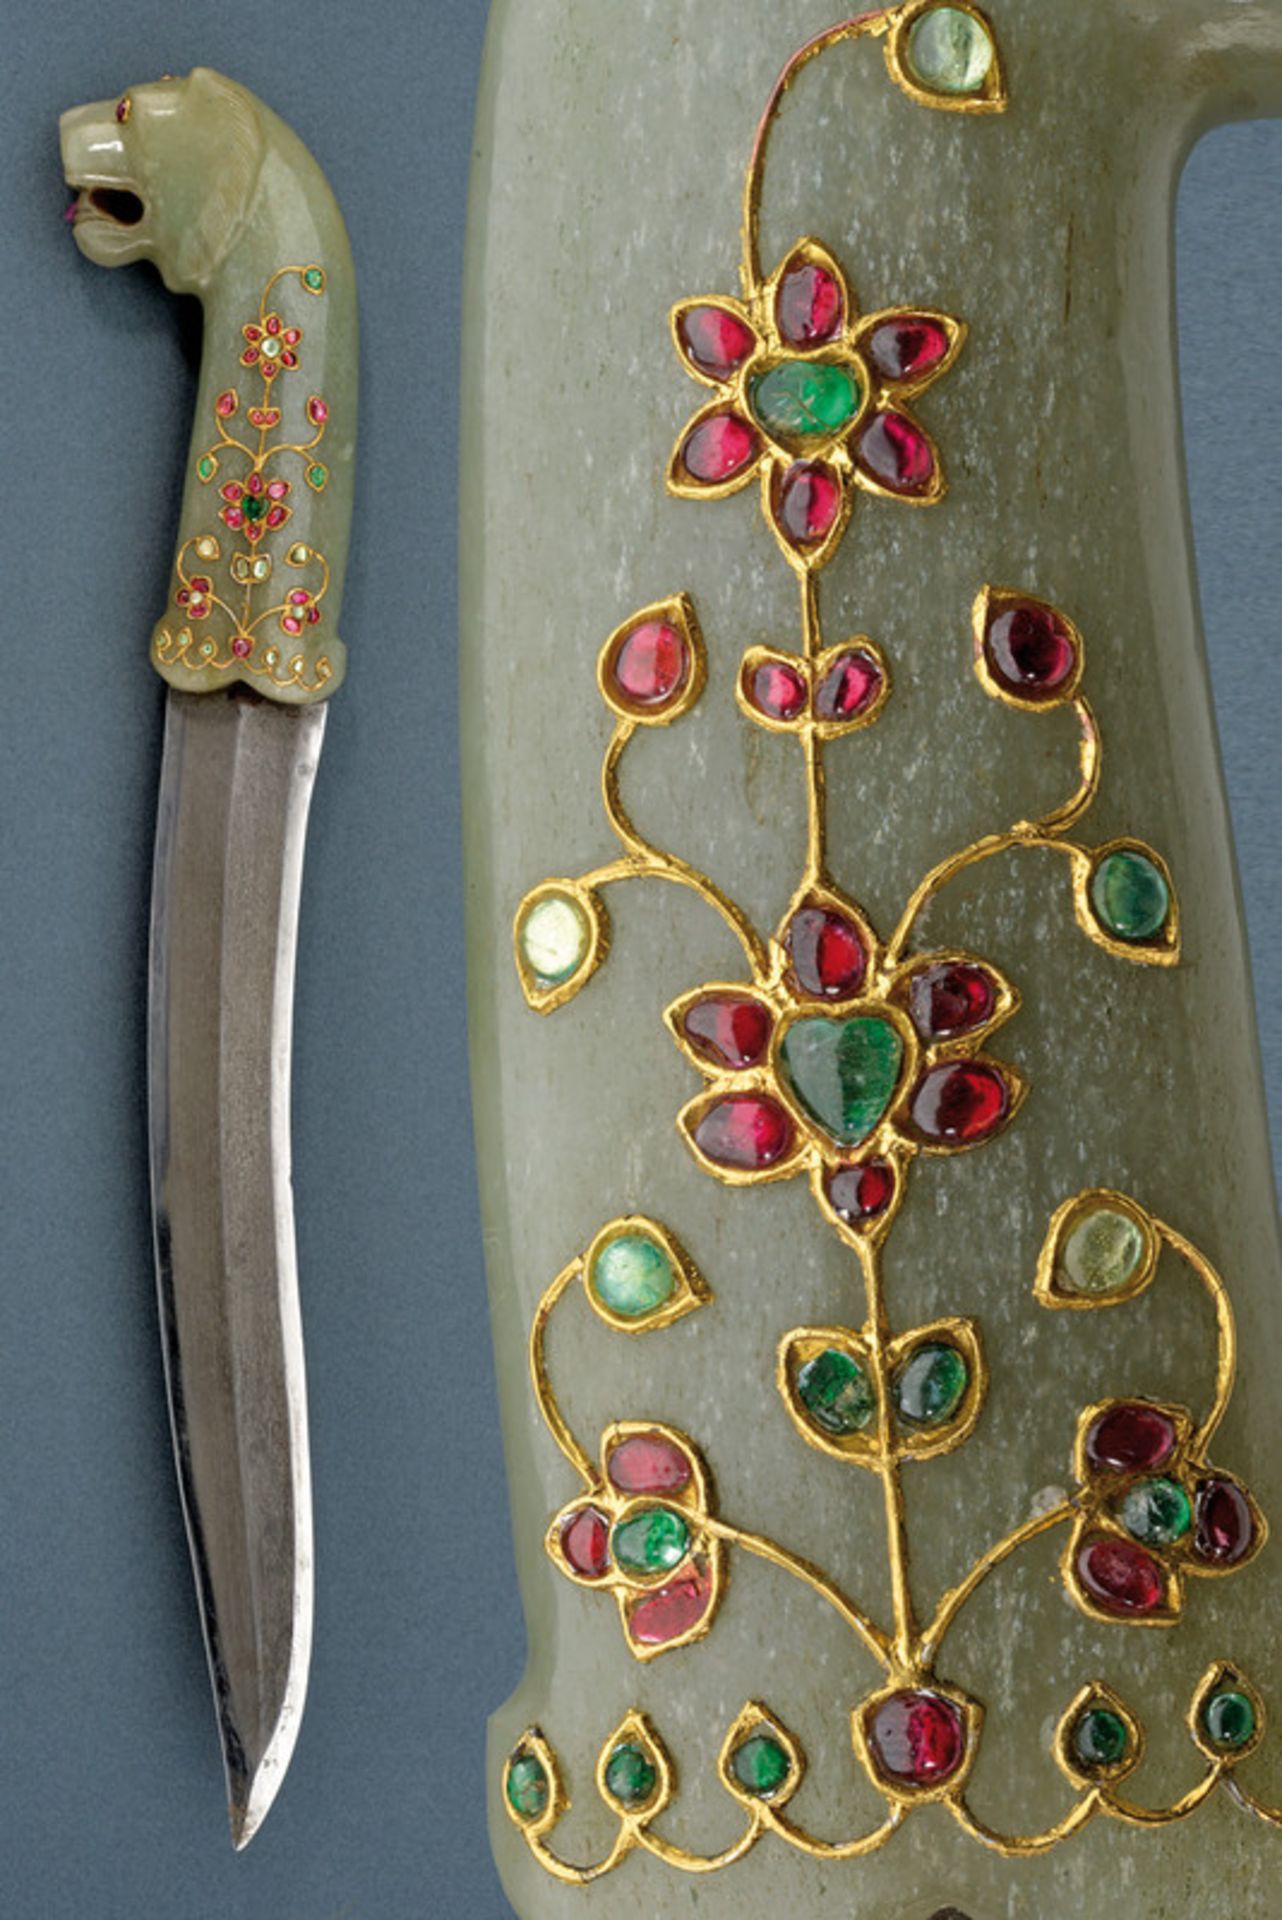 A jade hilted dagger decorated with stones and gold